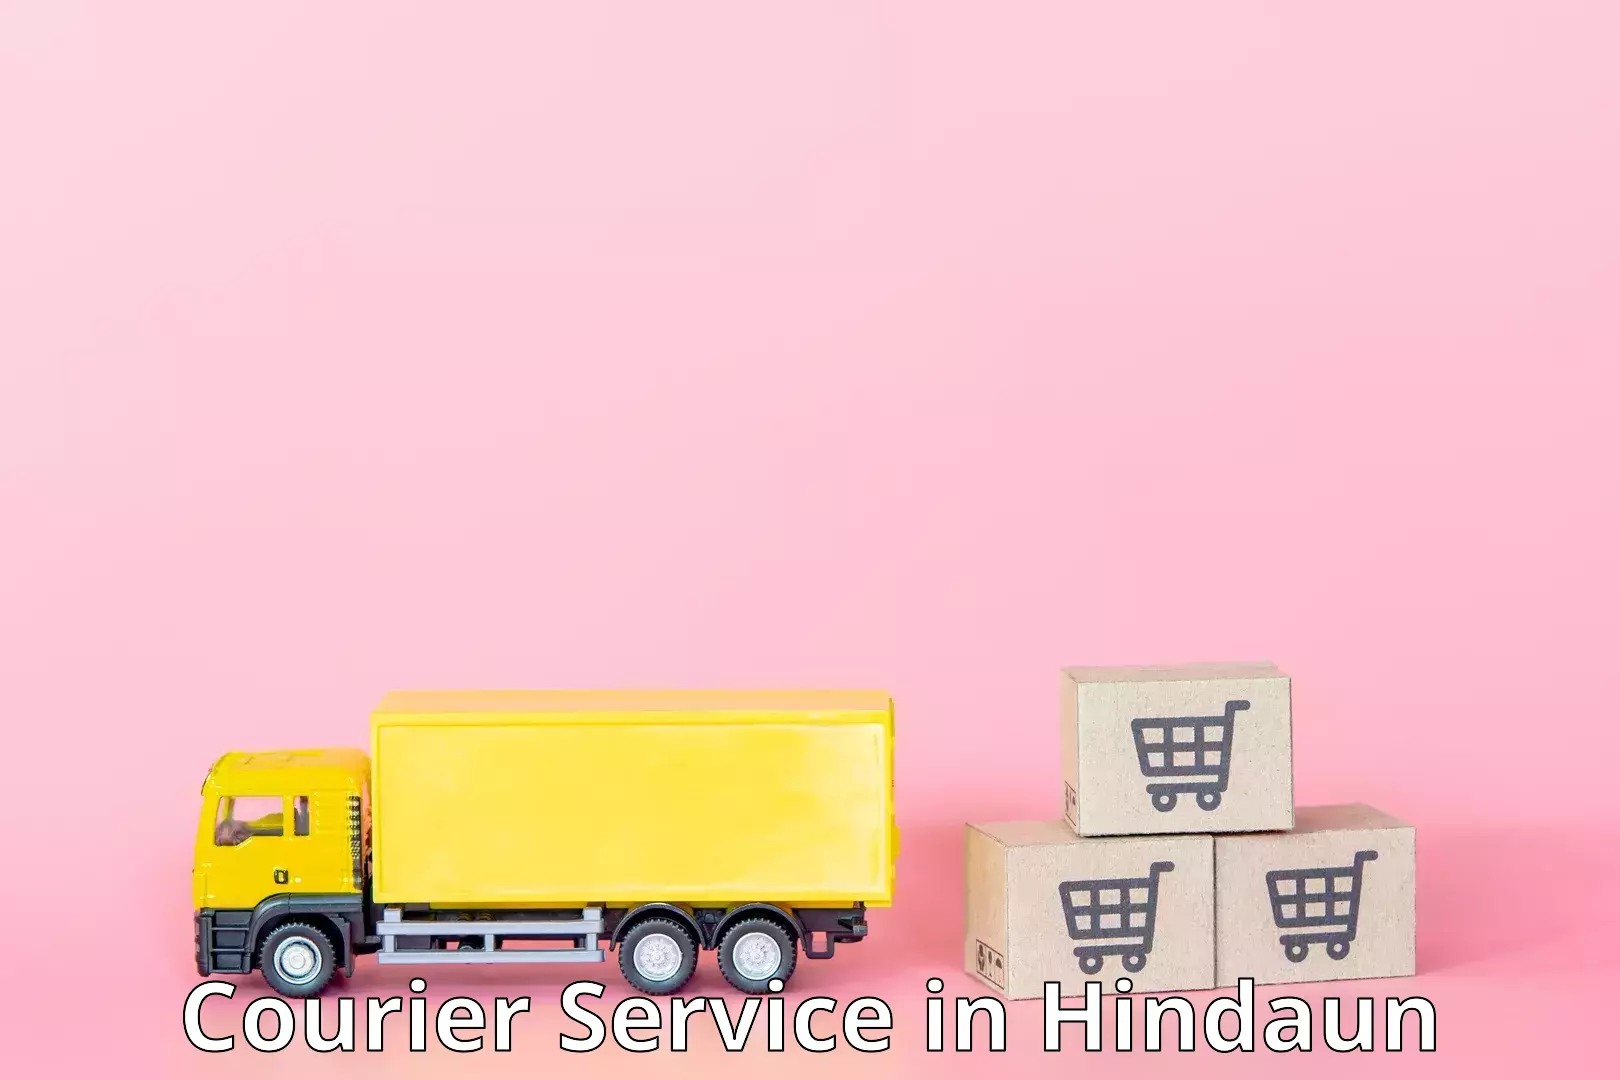 Tailored freight services in Hindaun